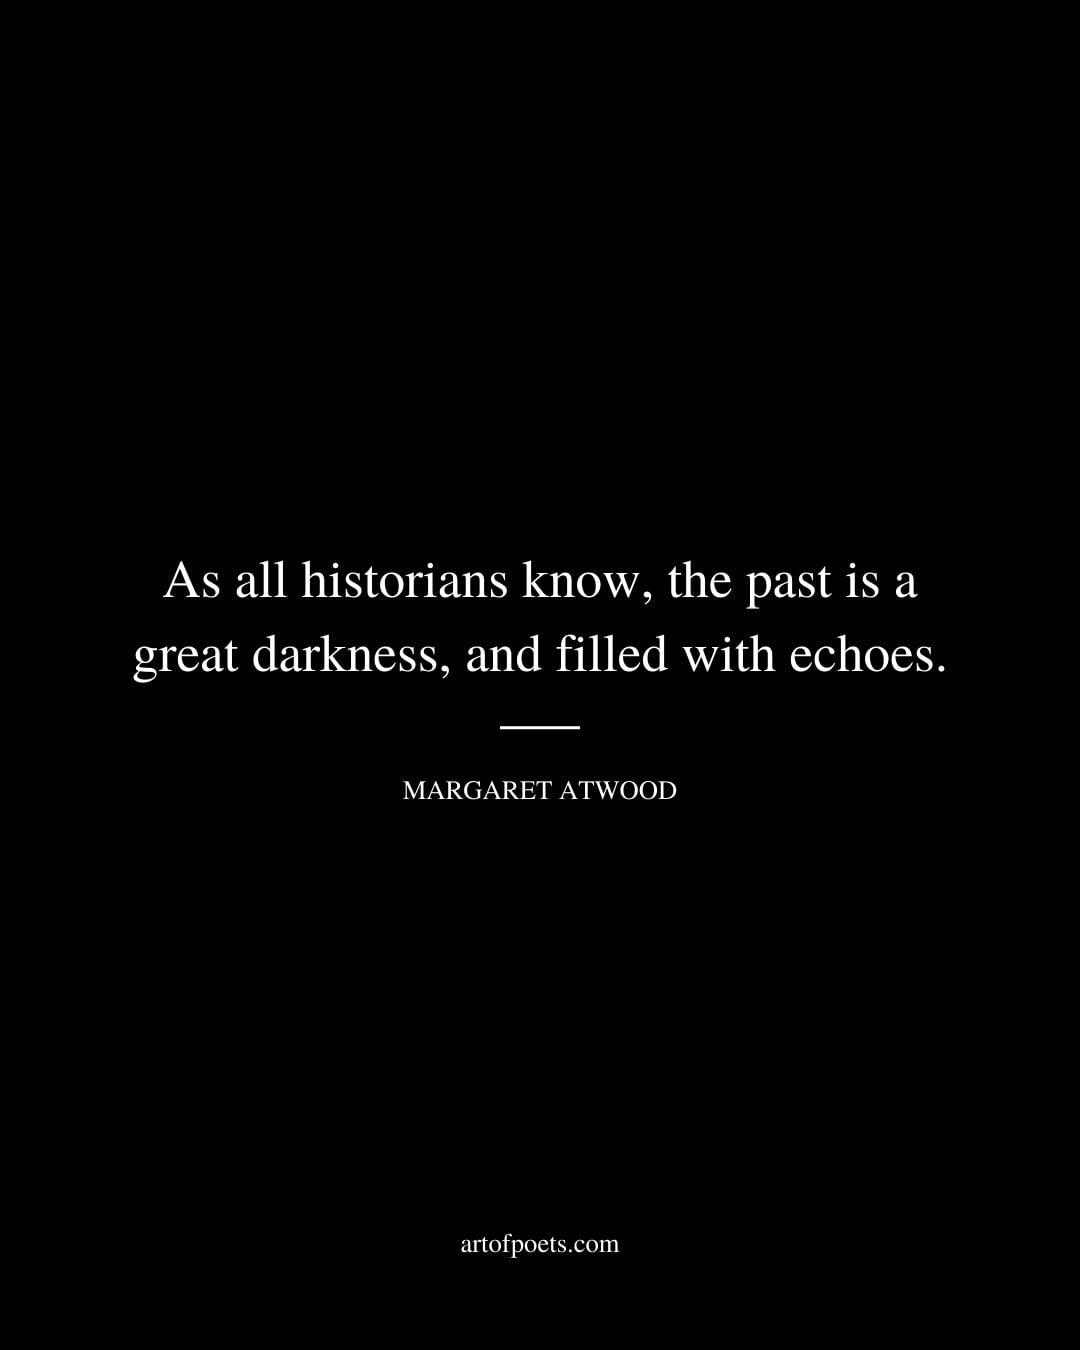 As all historians know the past is a great darkness and filled with echoes. Margaret Atwood